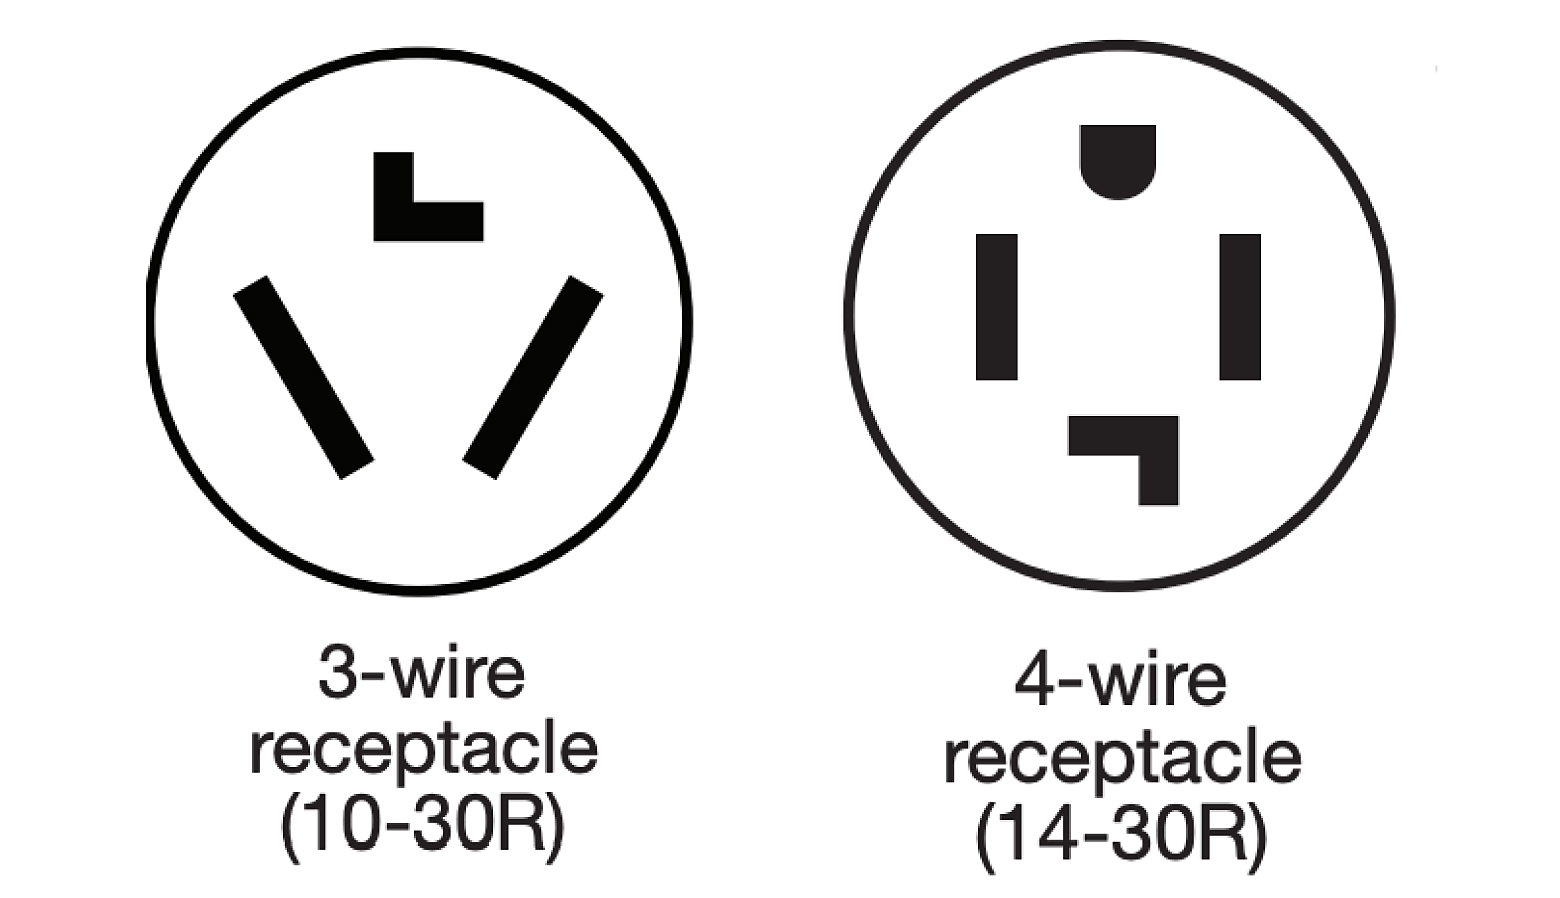 An image comparing 3-wire versus 4-wire receptacles